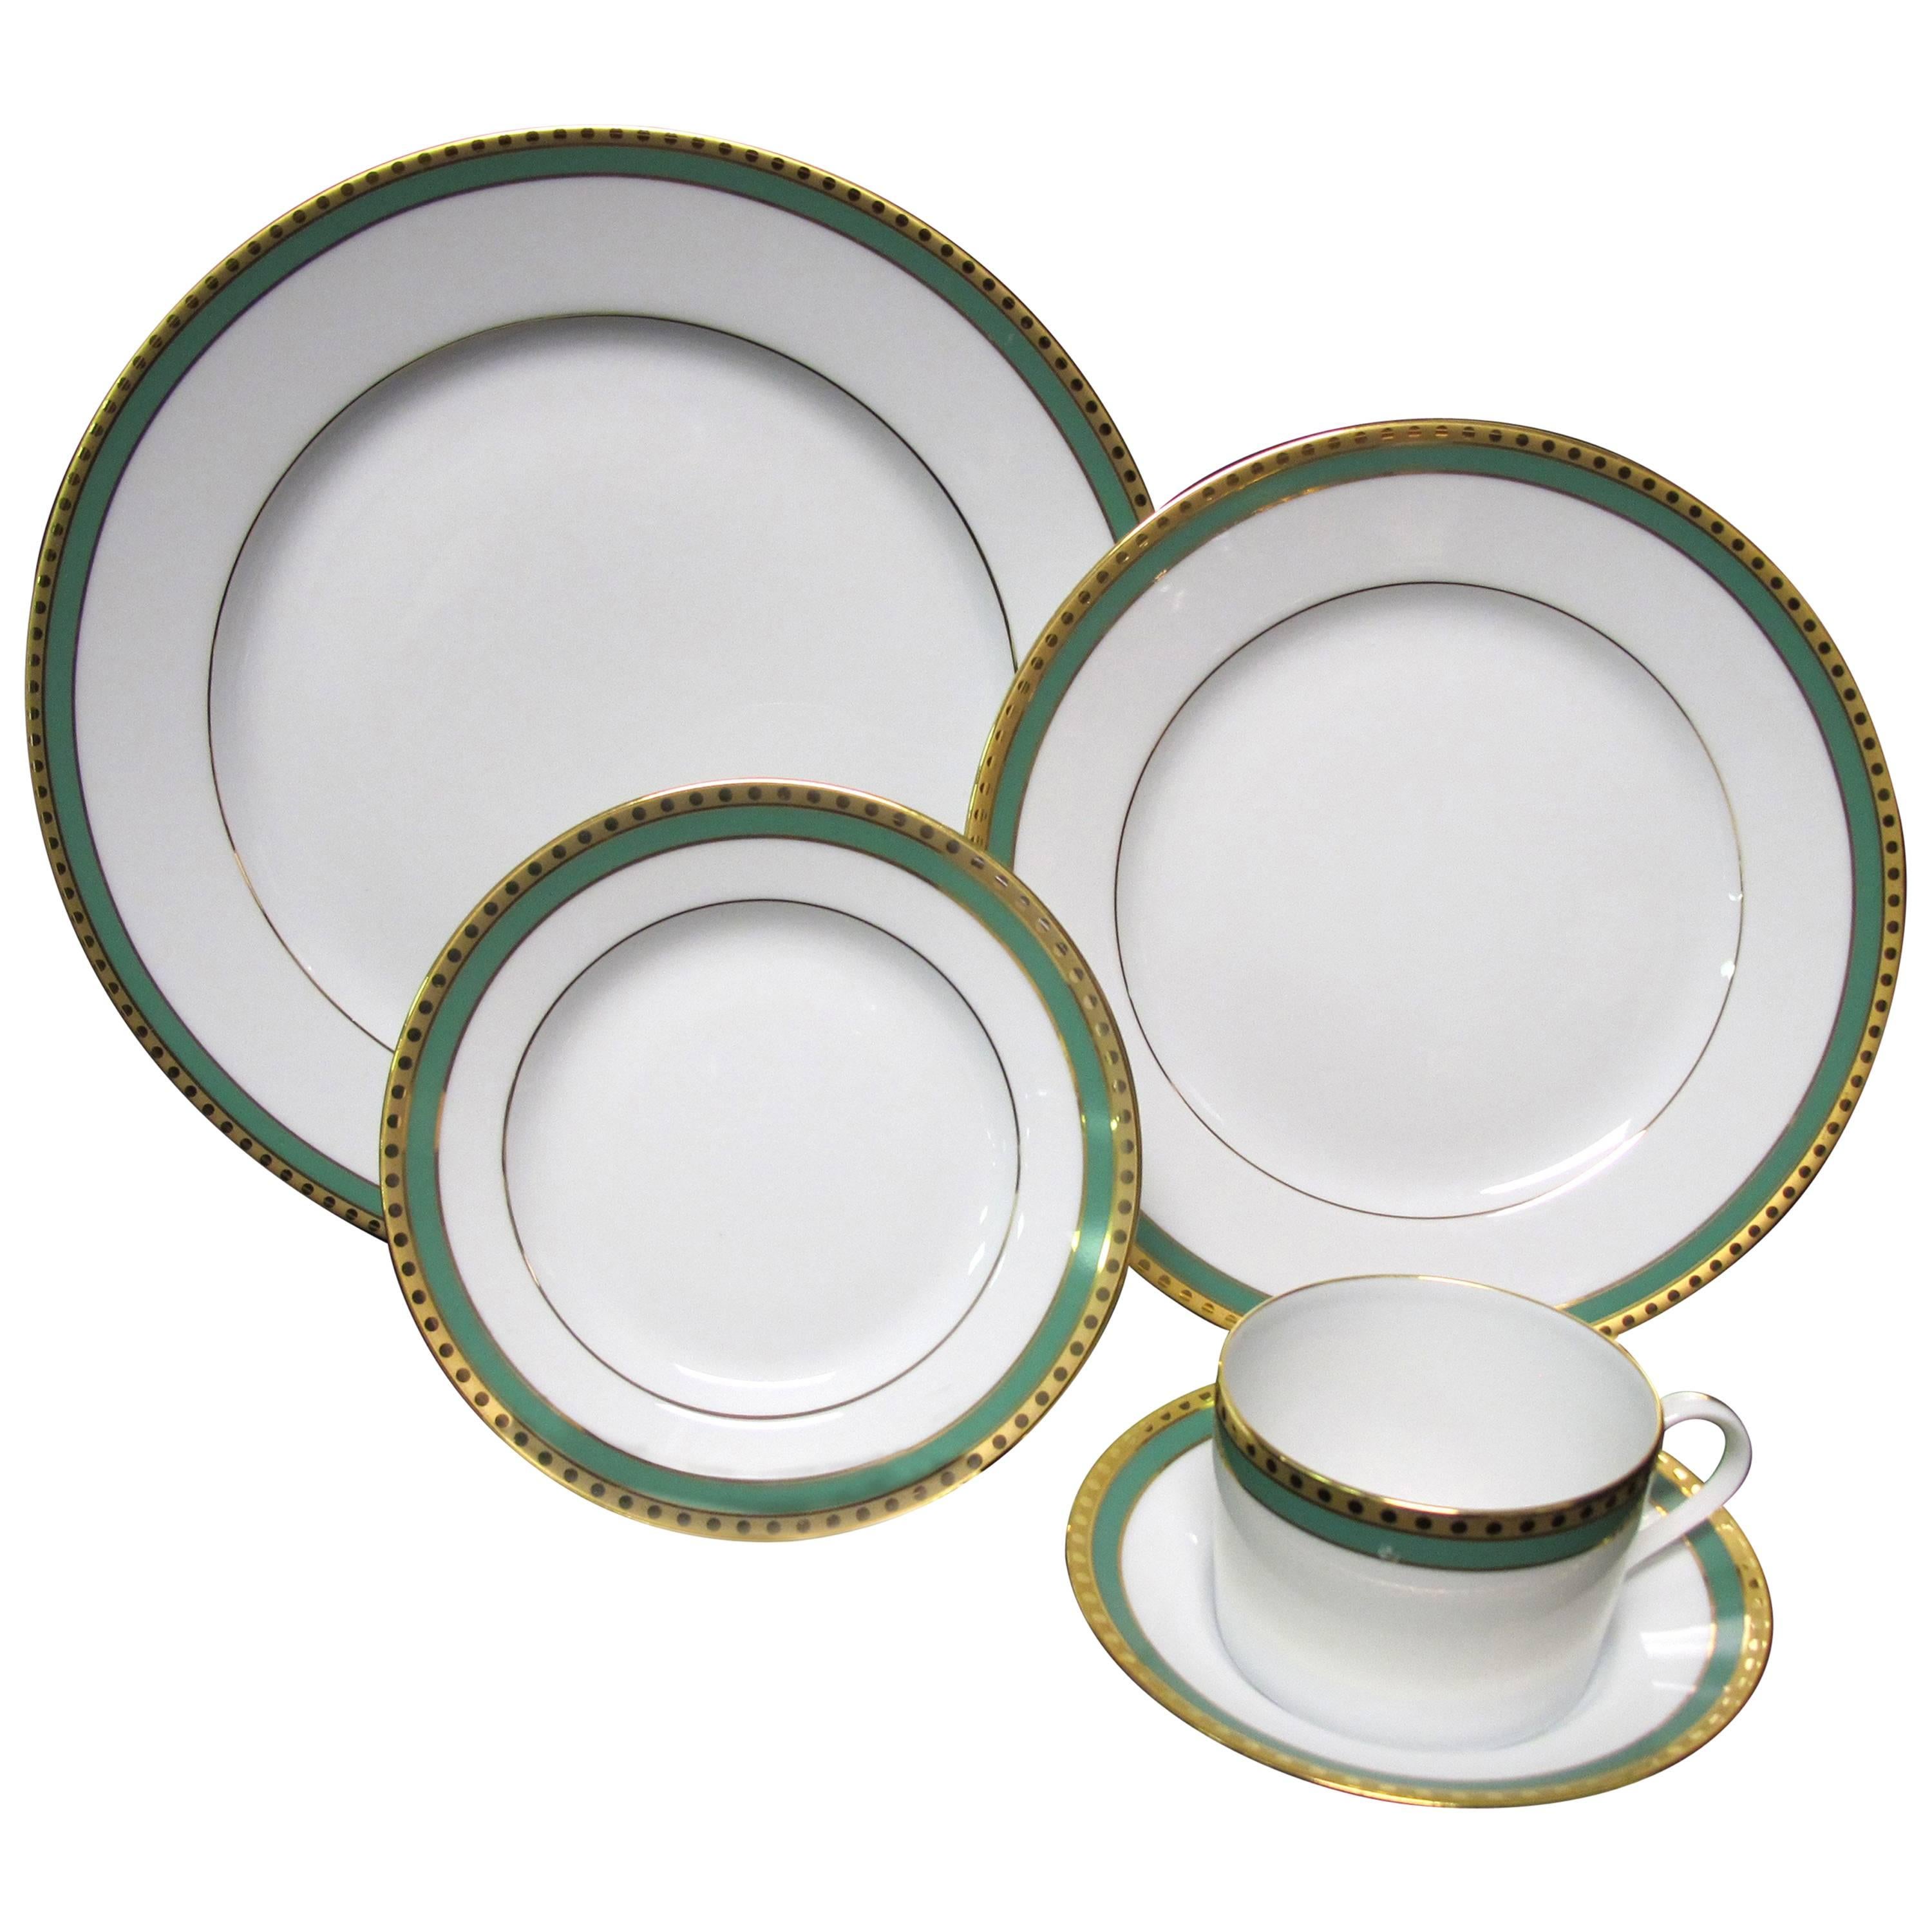 Tiffany & Co. Green Band, Single Place Setting of Five Pieces For Sale